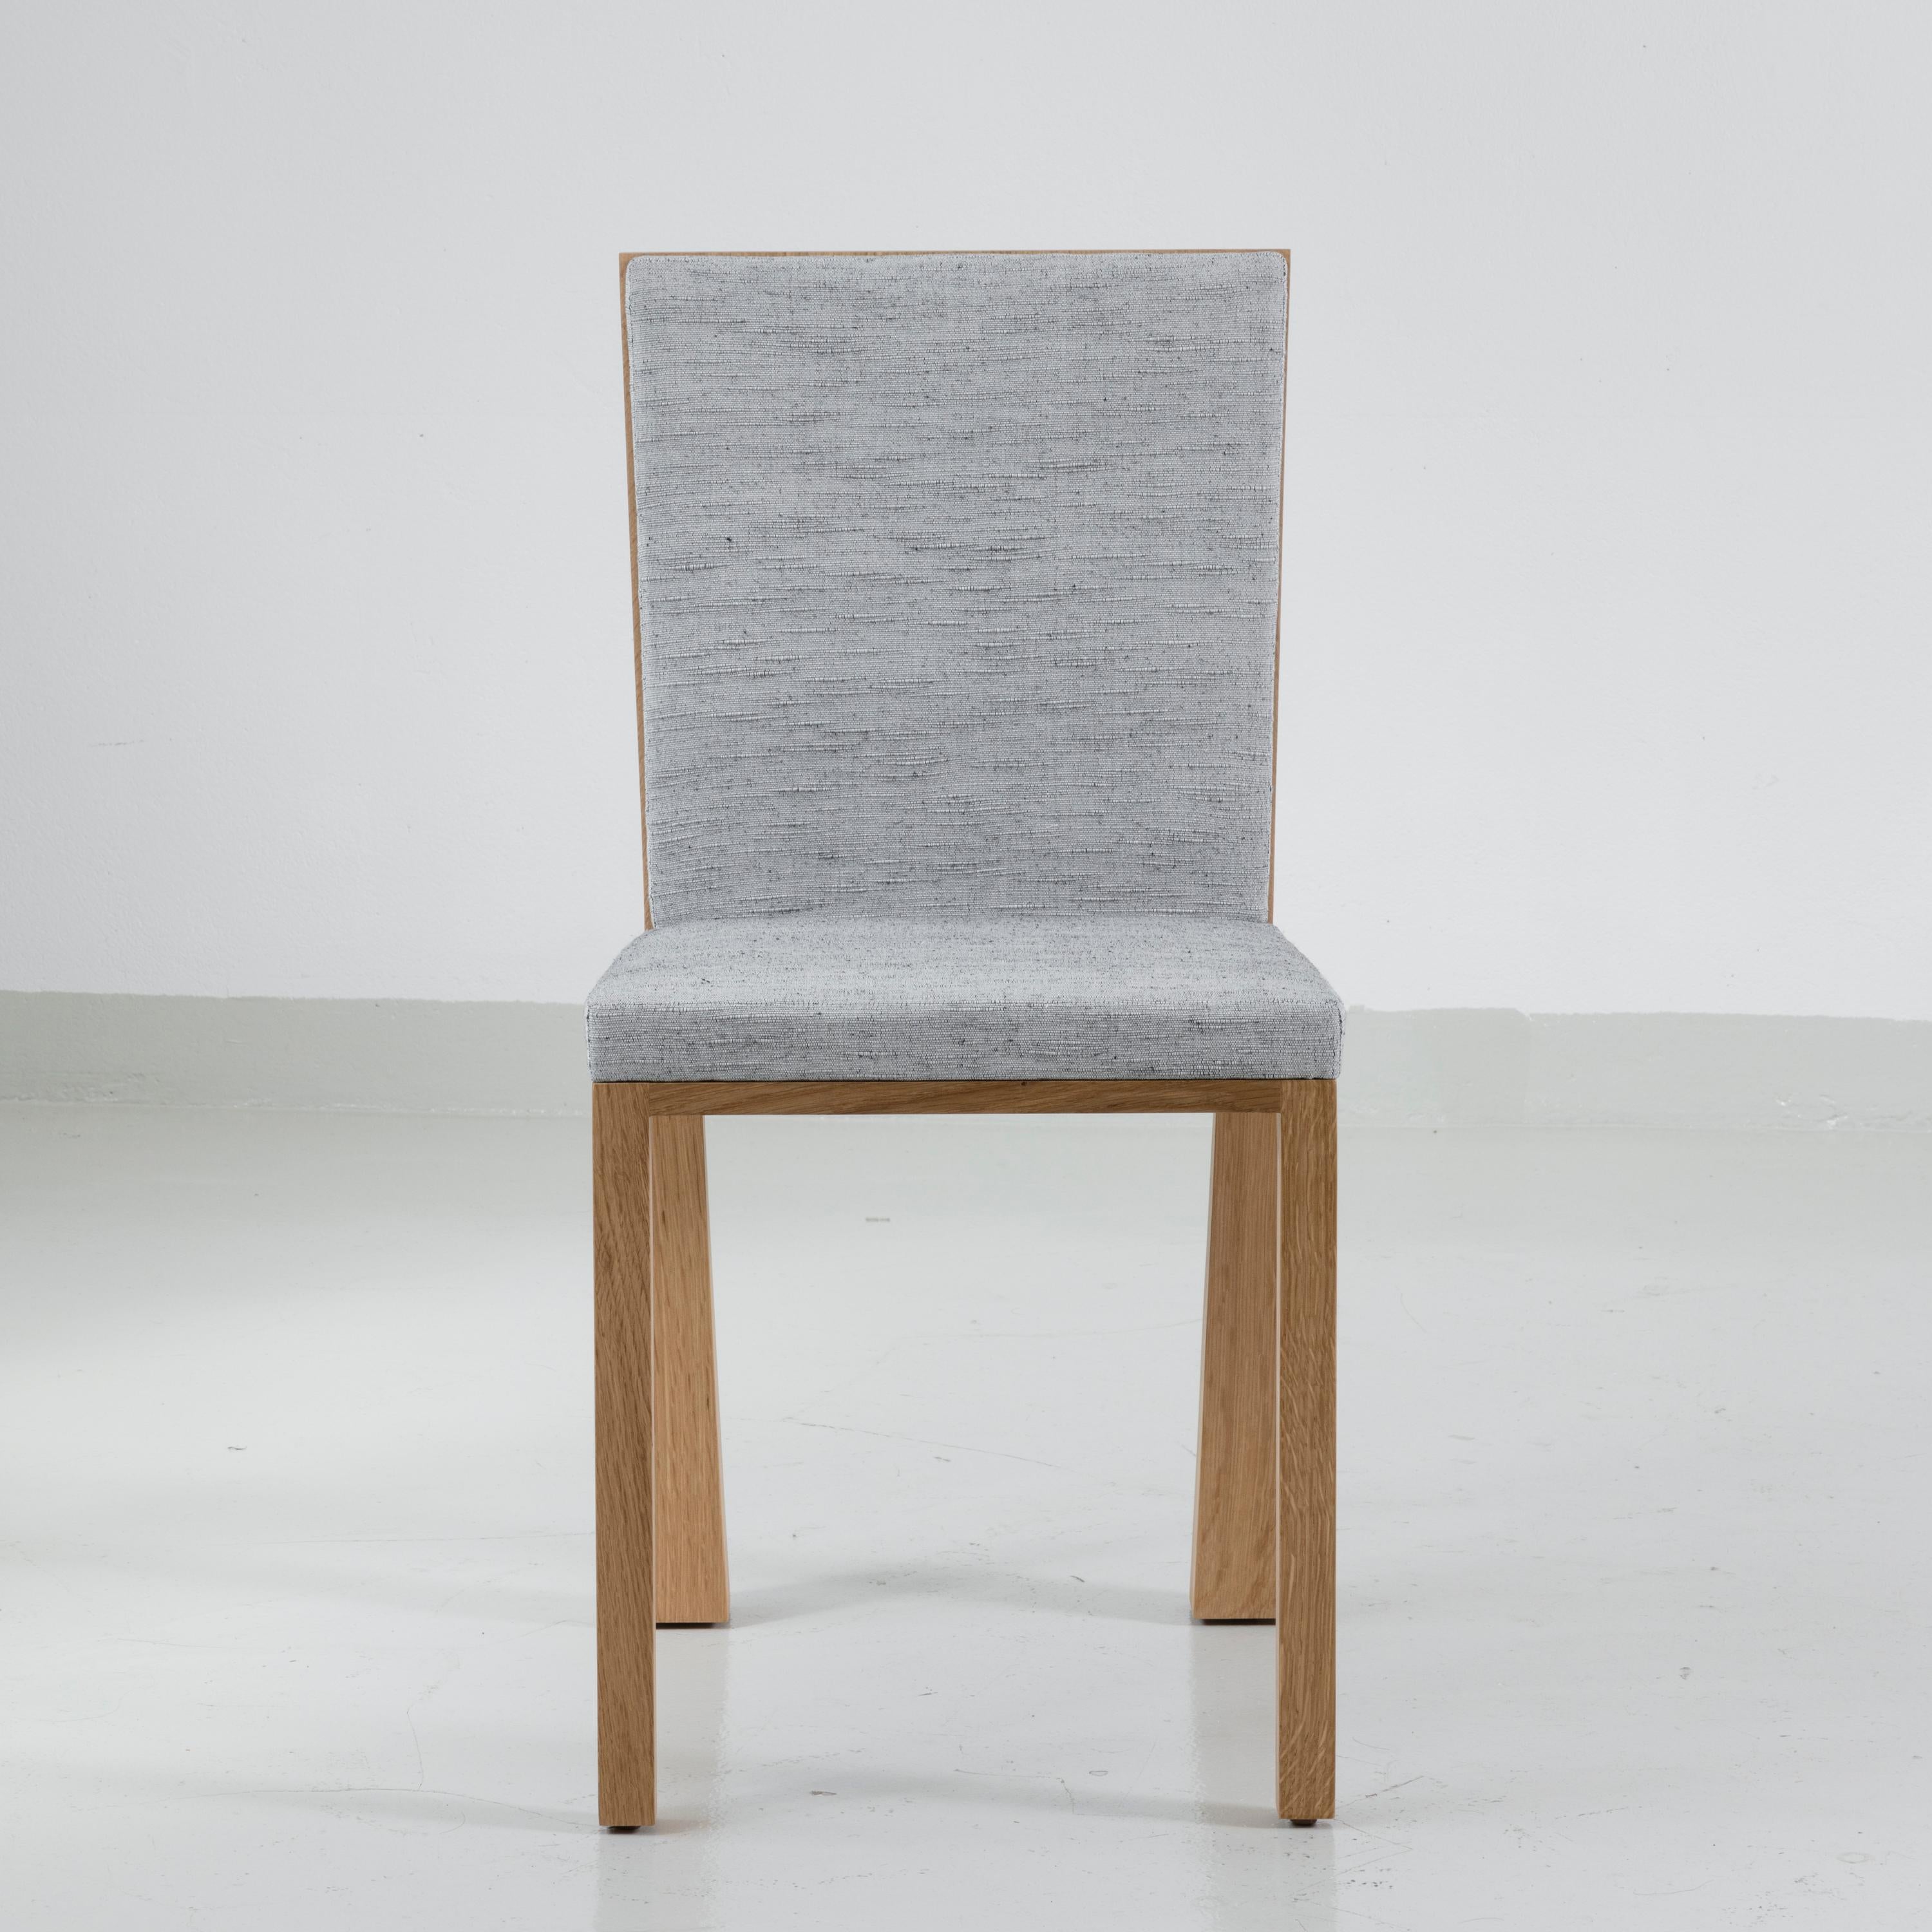 Exceptional proportions for this comfortable chair by Tinatin Kilaberidze. Oak. Upholstered.